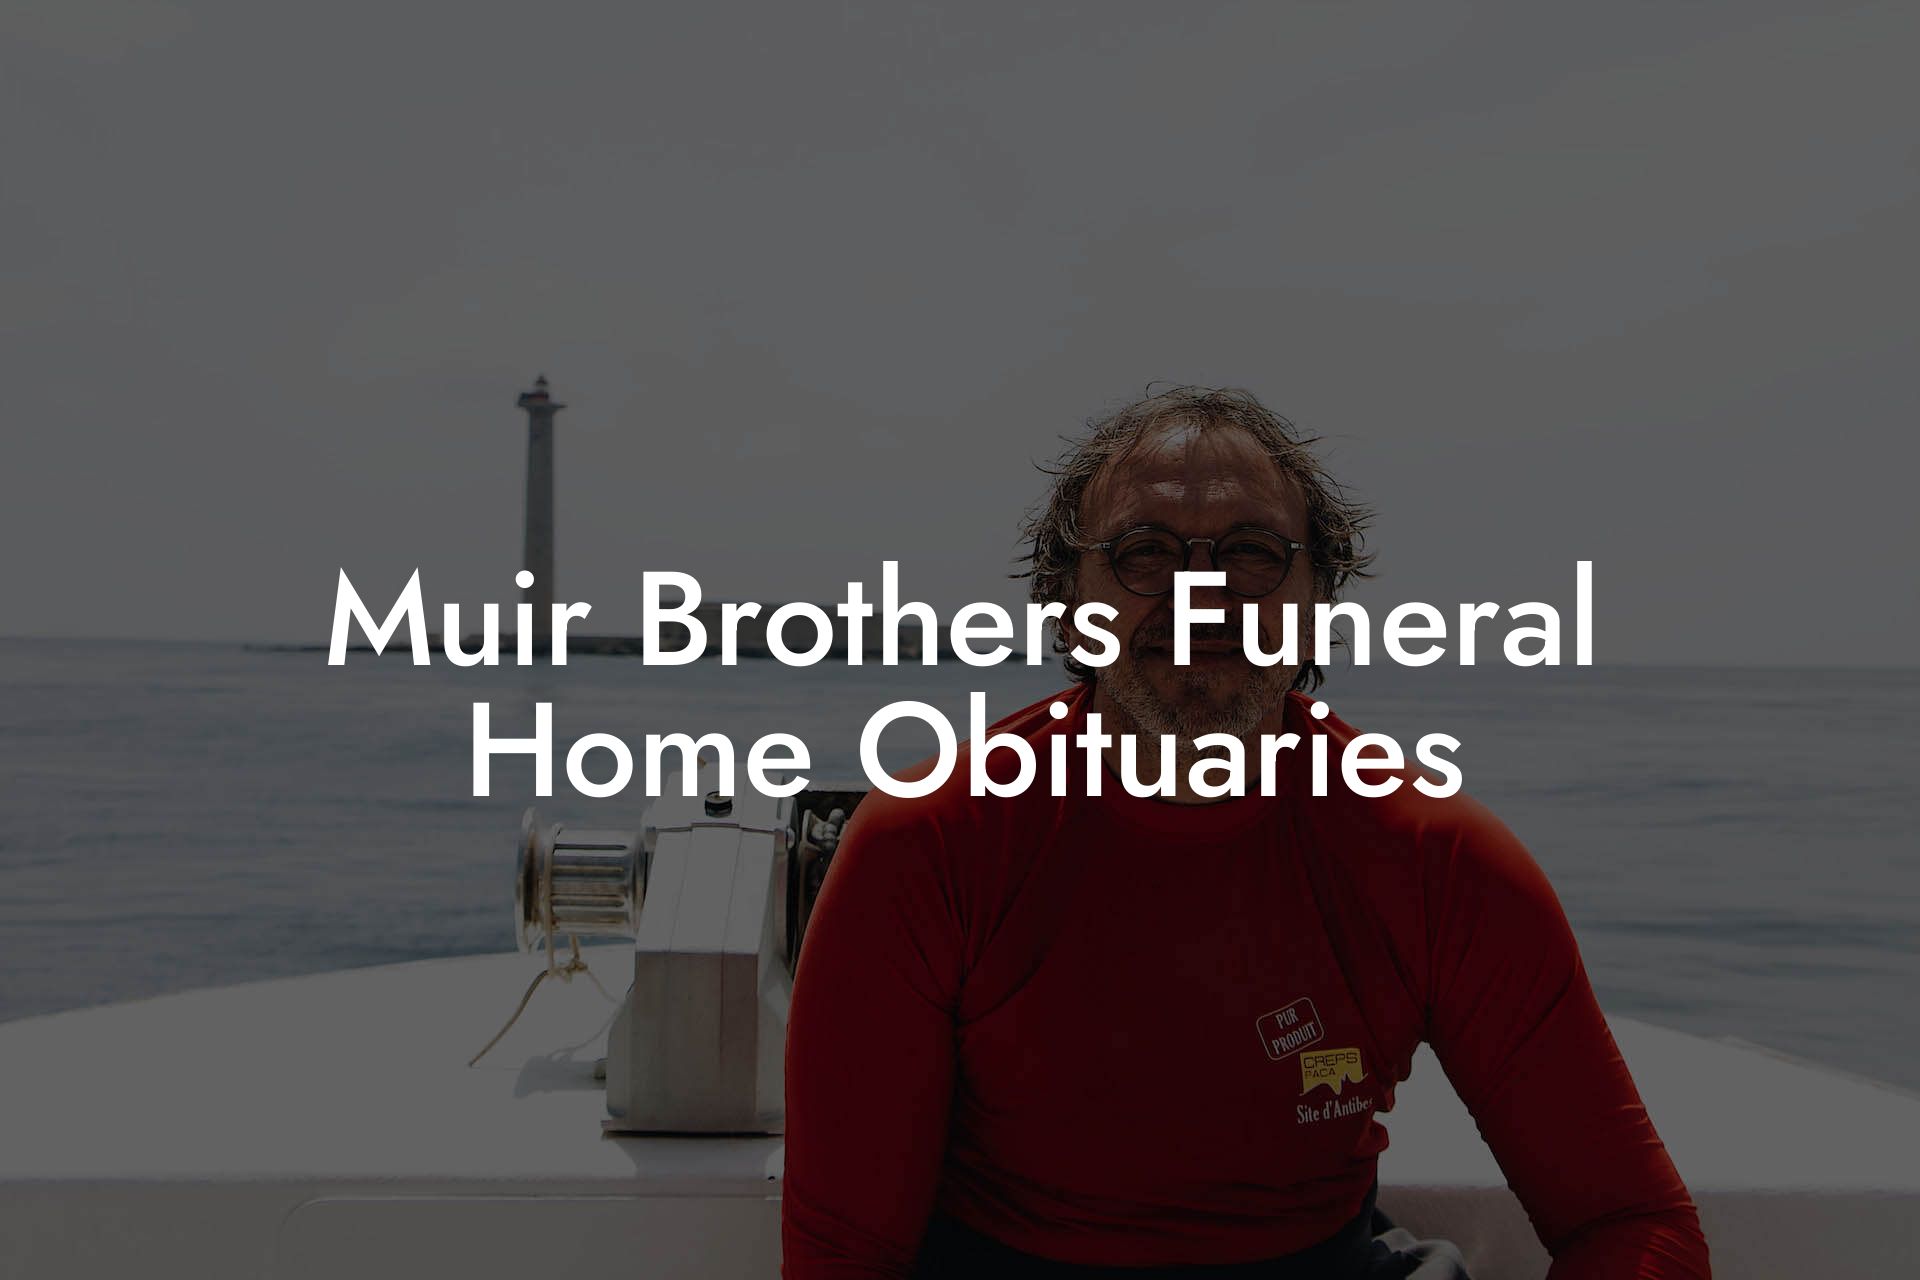 Muir Brothers Funeral Home Obituaries